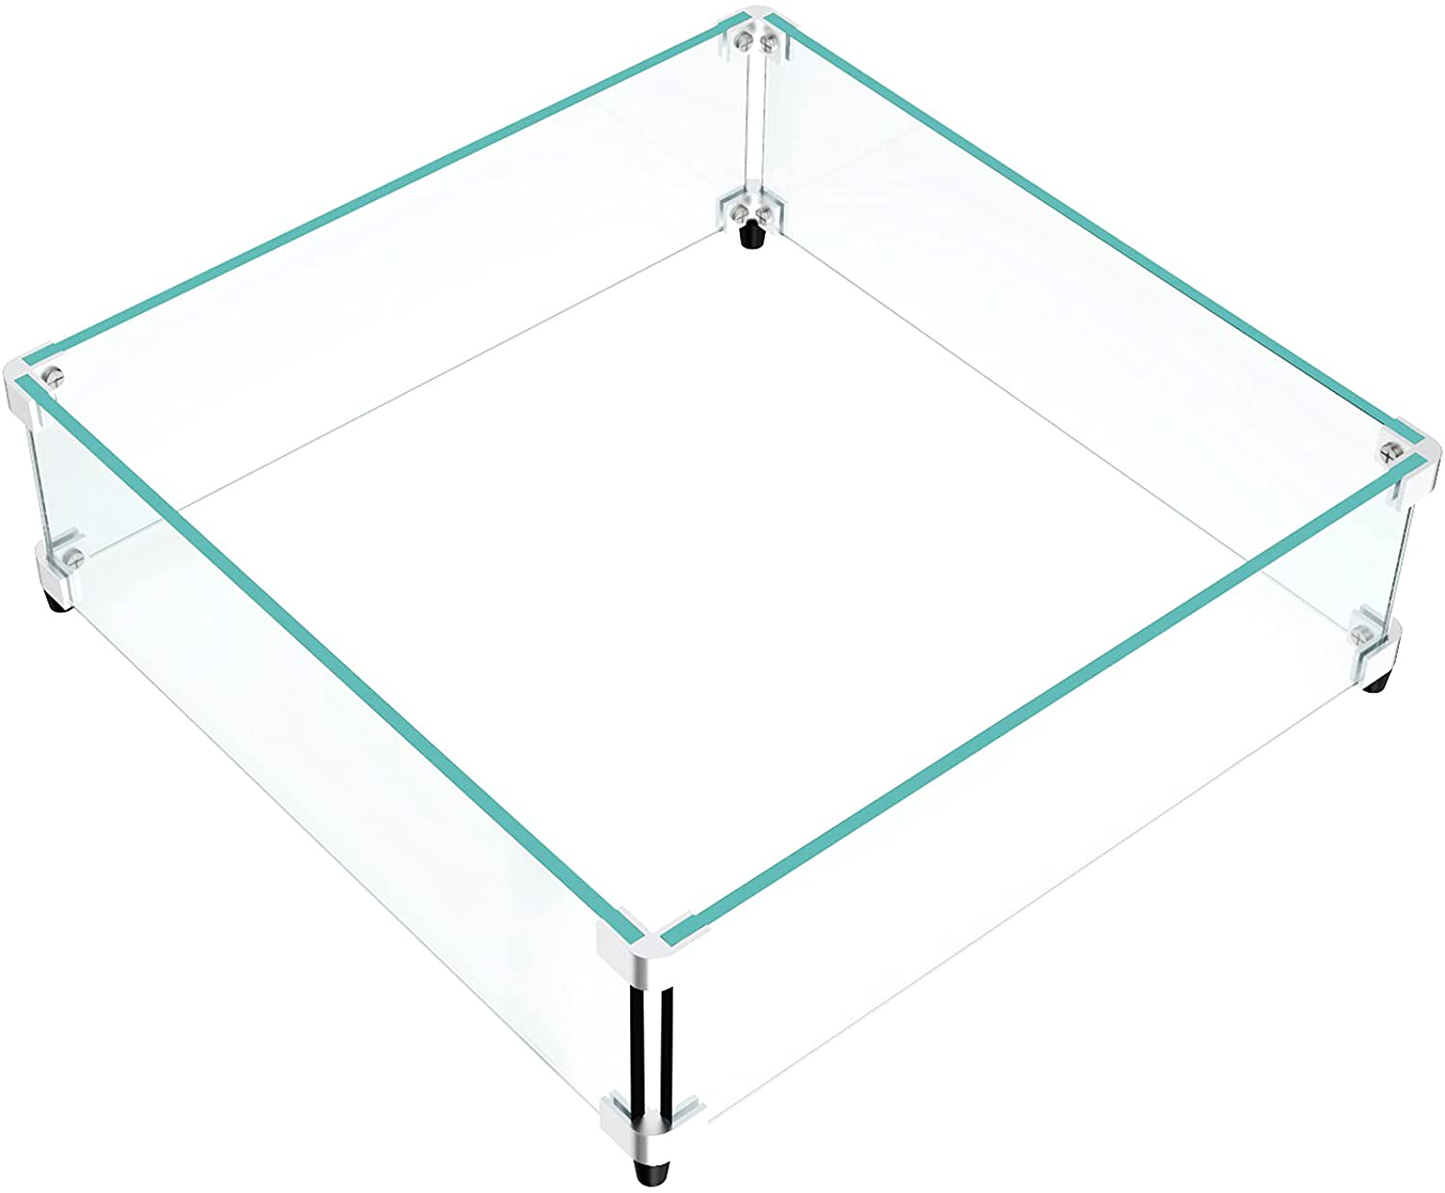 GASPRO 19.5 Inch Square Fire Pit Wind Guard for 28-32 Inch Fire Table and 14 Inch Drop-in Fire Pit Burner Pans, Clear Tempered Glass, 5/16 Inch Thick